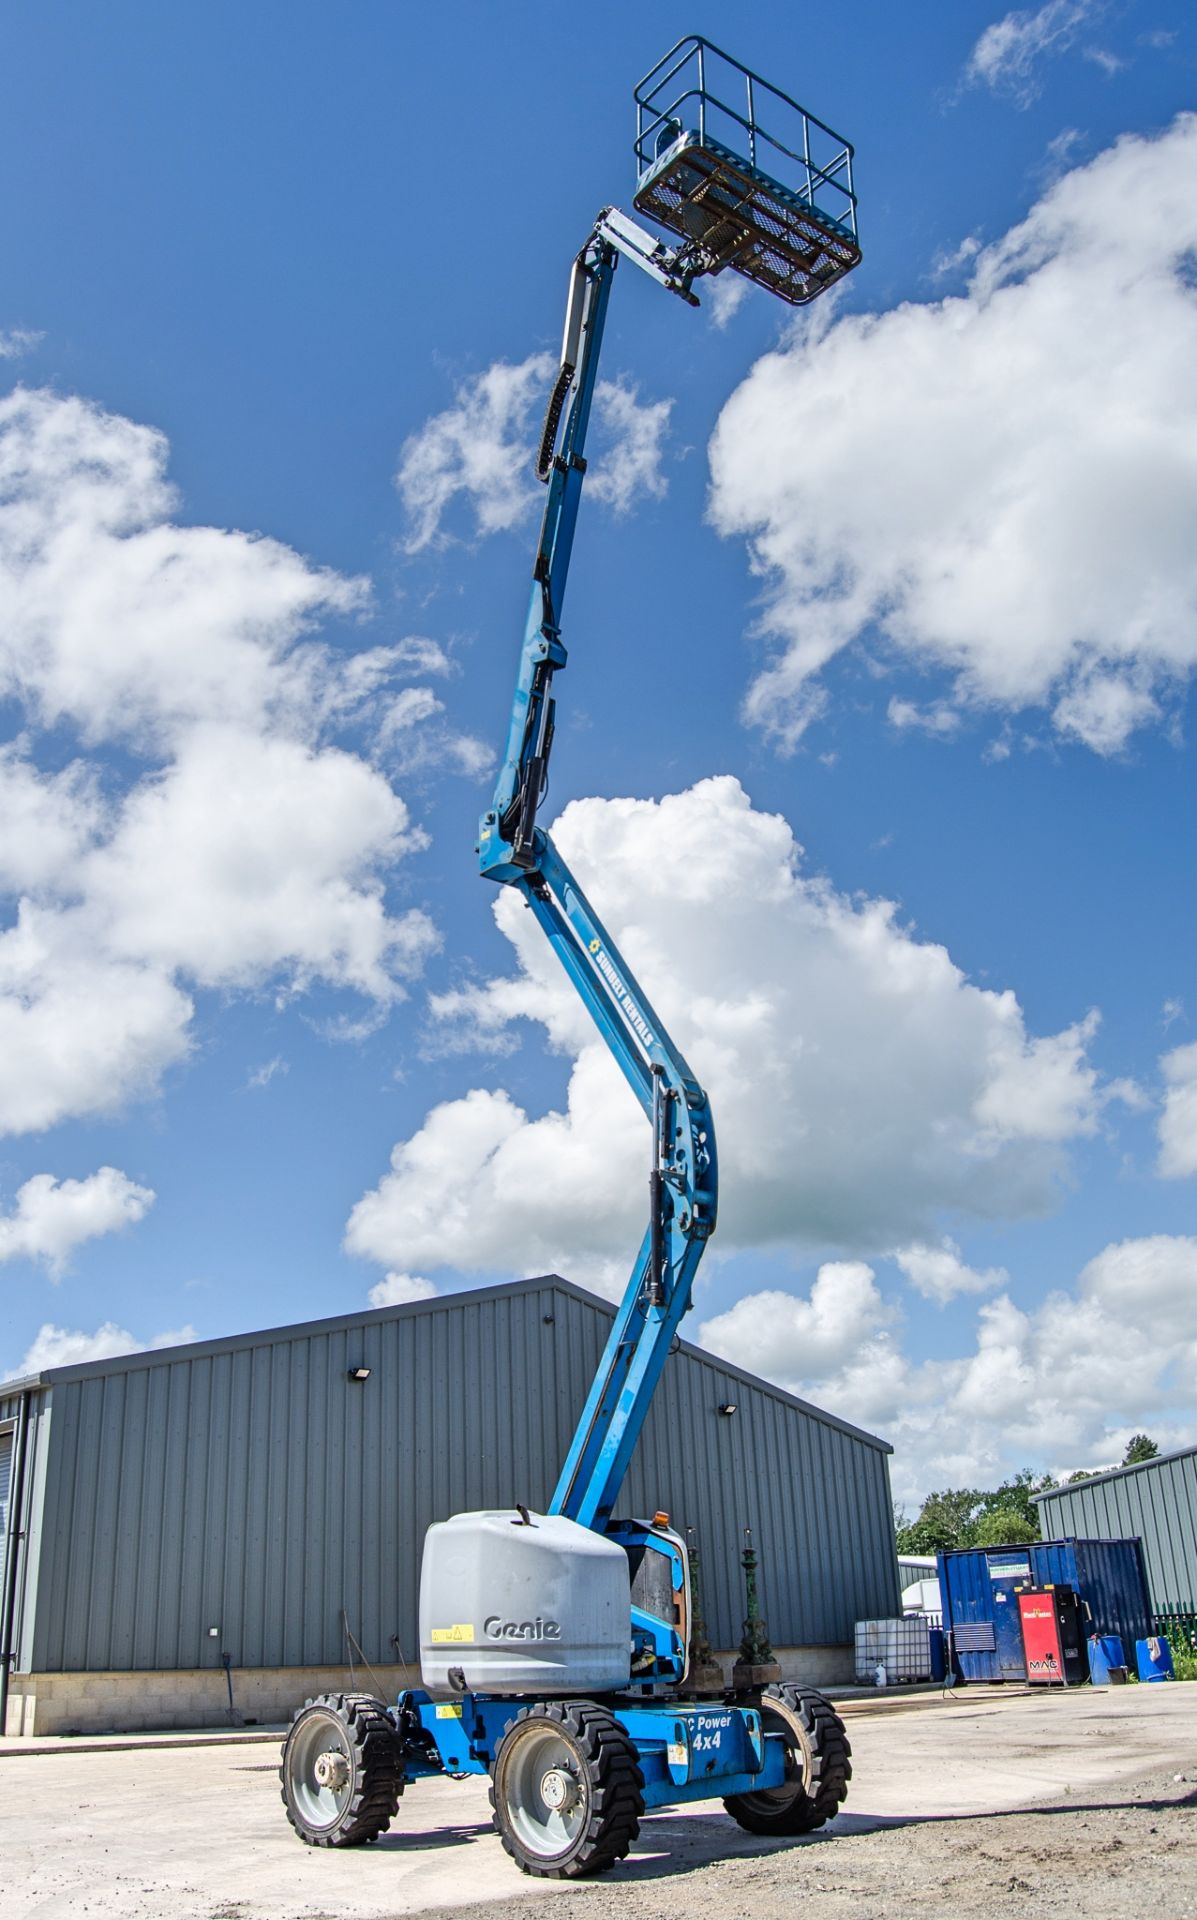 Genie Z-45/25 battery electric/diesel 4WD articulated boom lift Year: 2011 S/N: Z452512B-2013 - Image 9 of 18